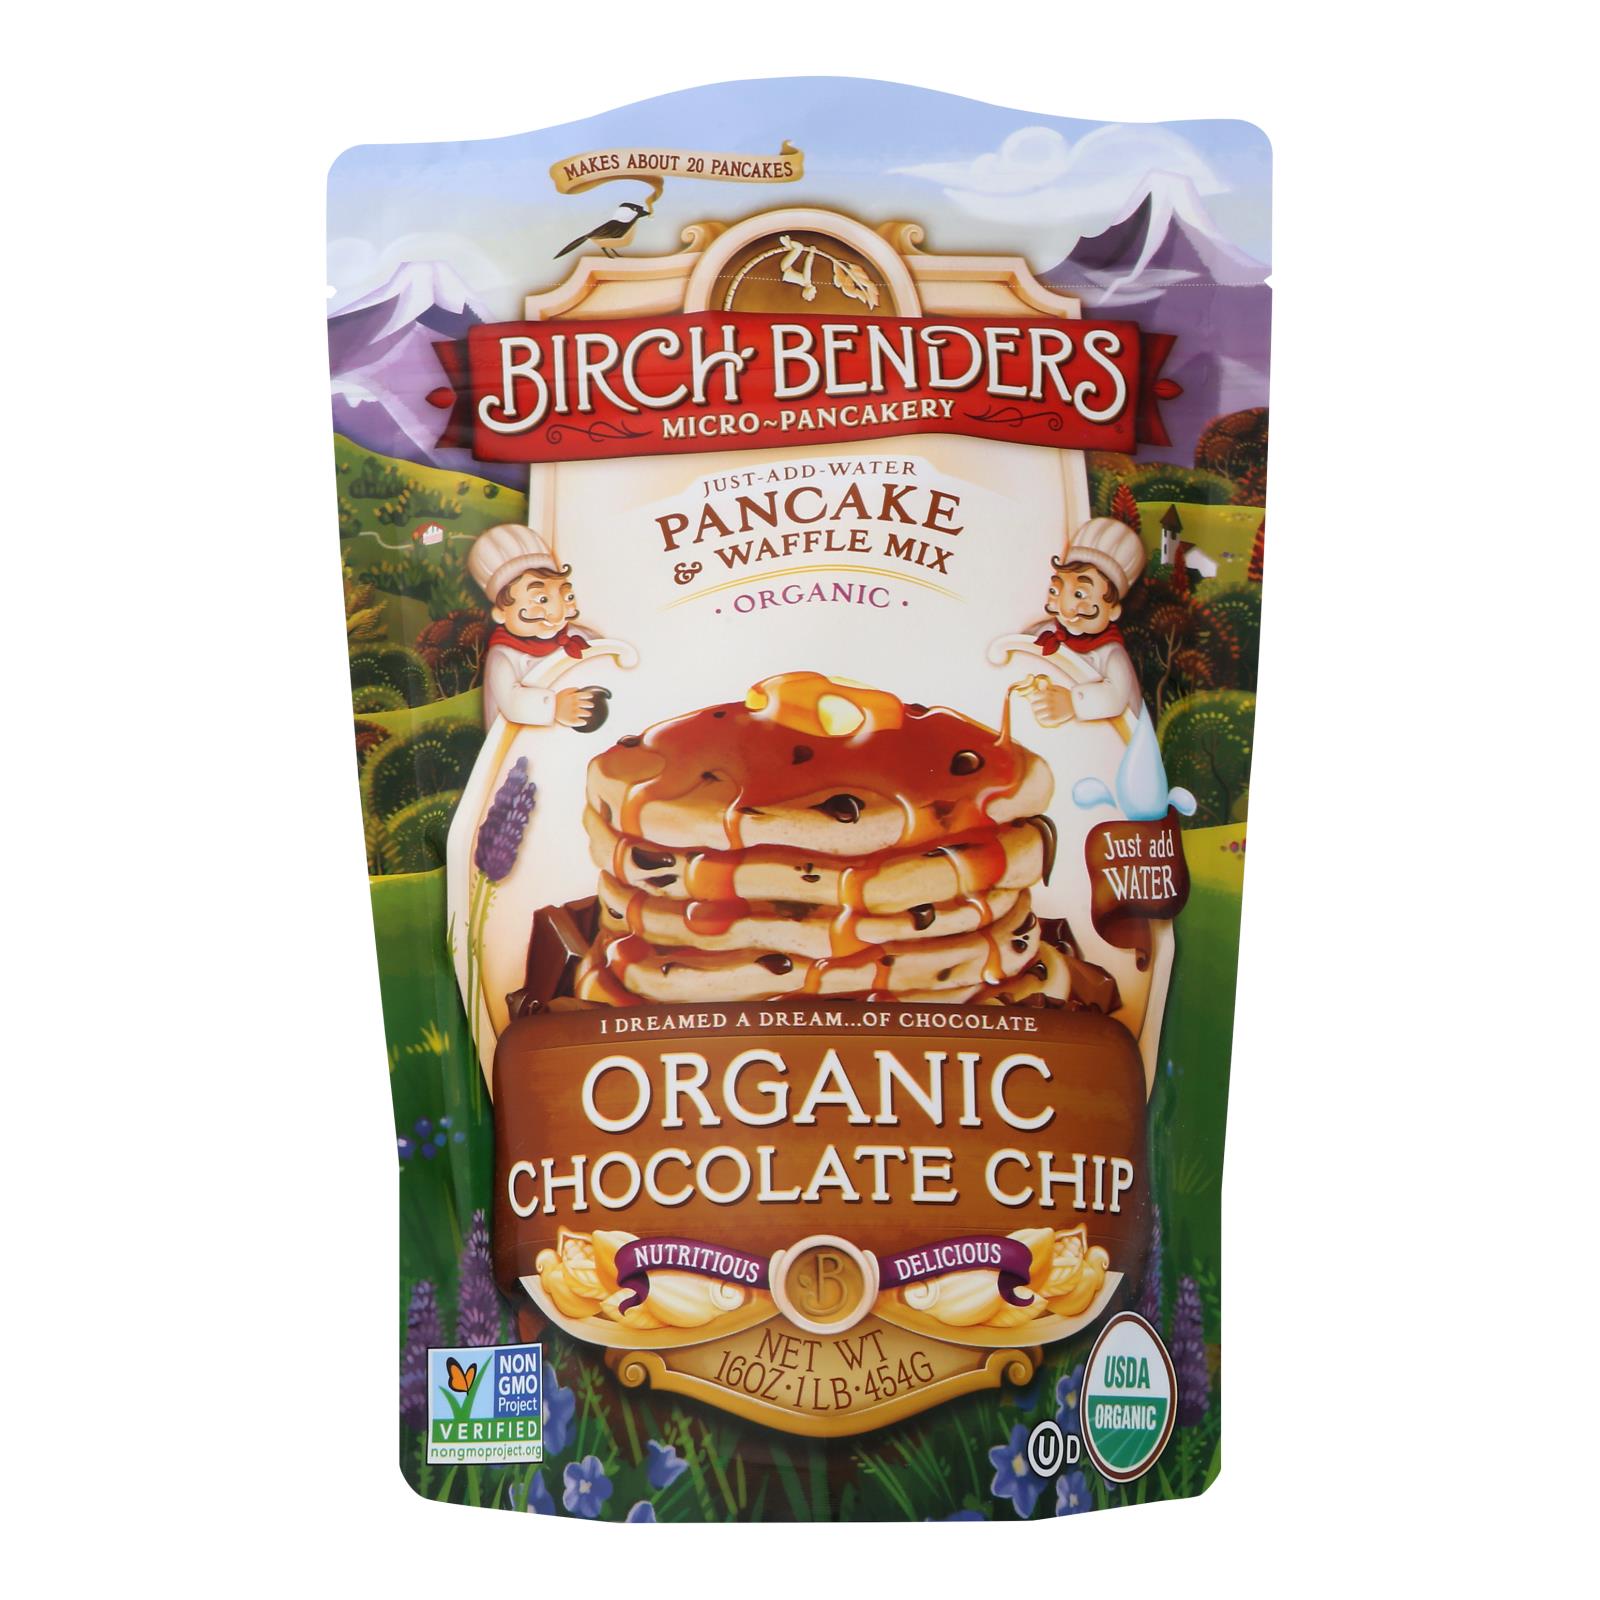 Birch Benders Pancake And Waffle Mix - Chocolate Chip - Case Of 6 - 16 Oz.